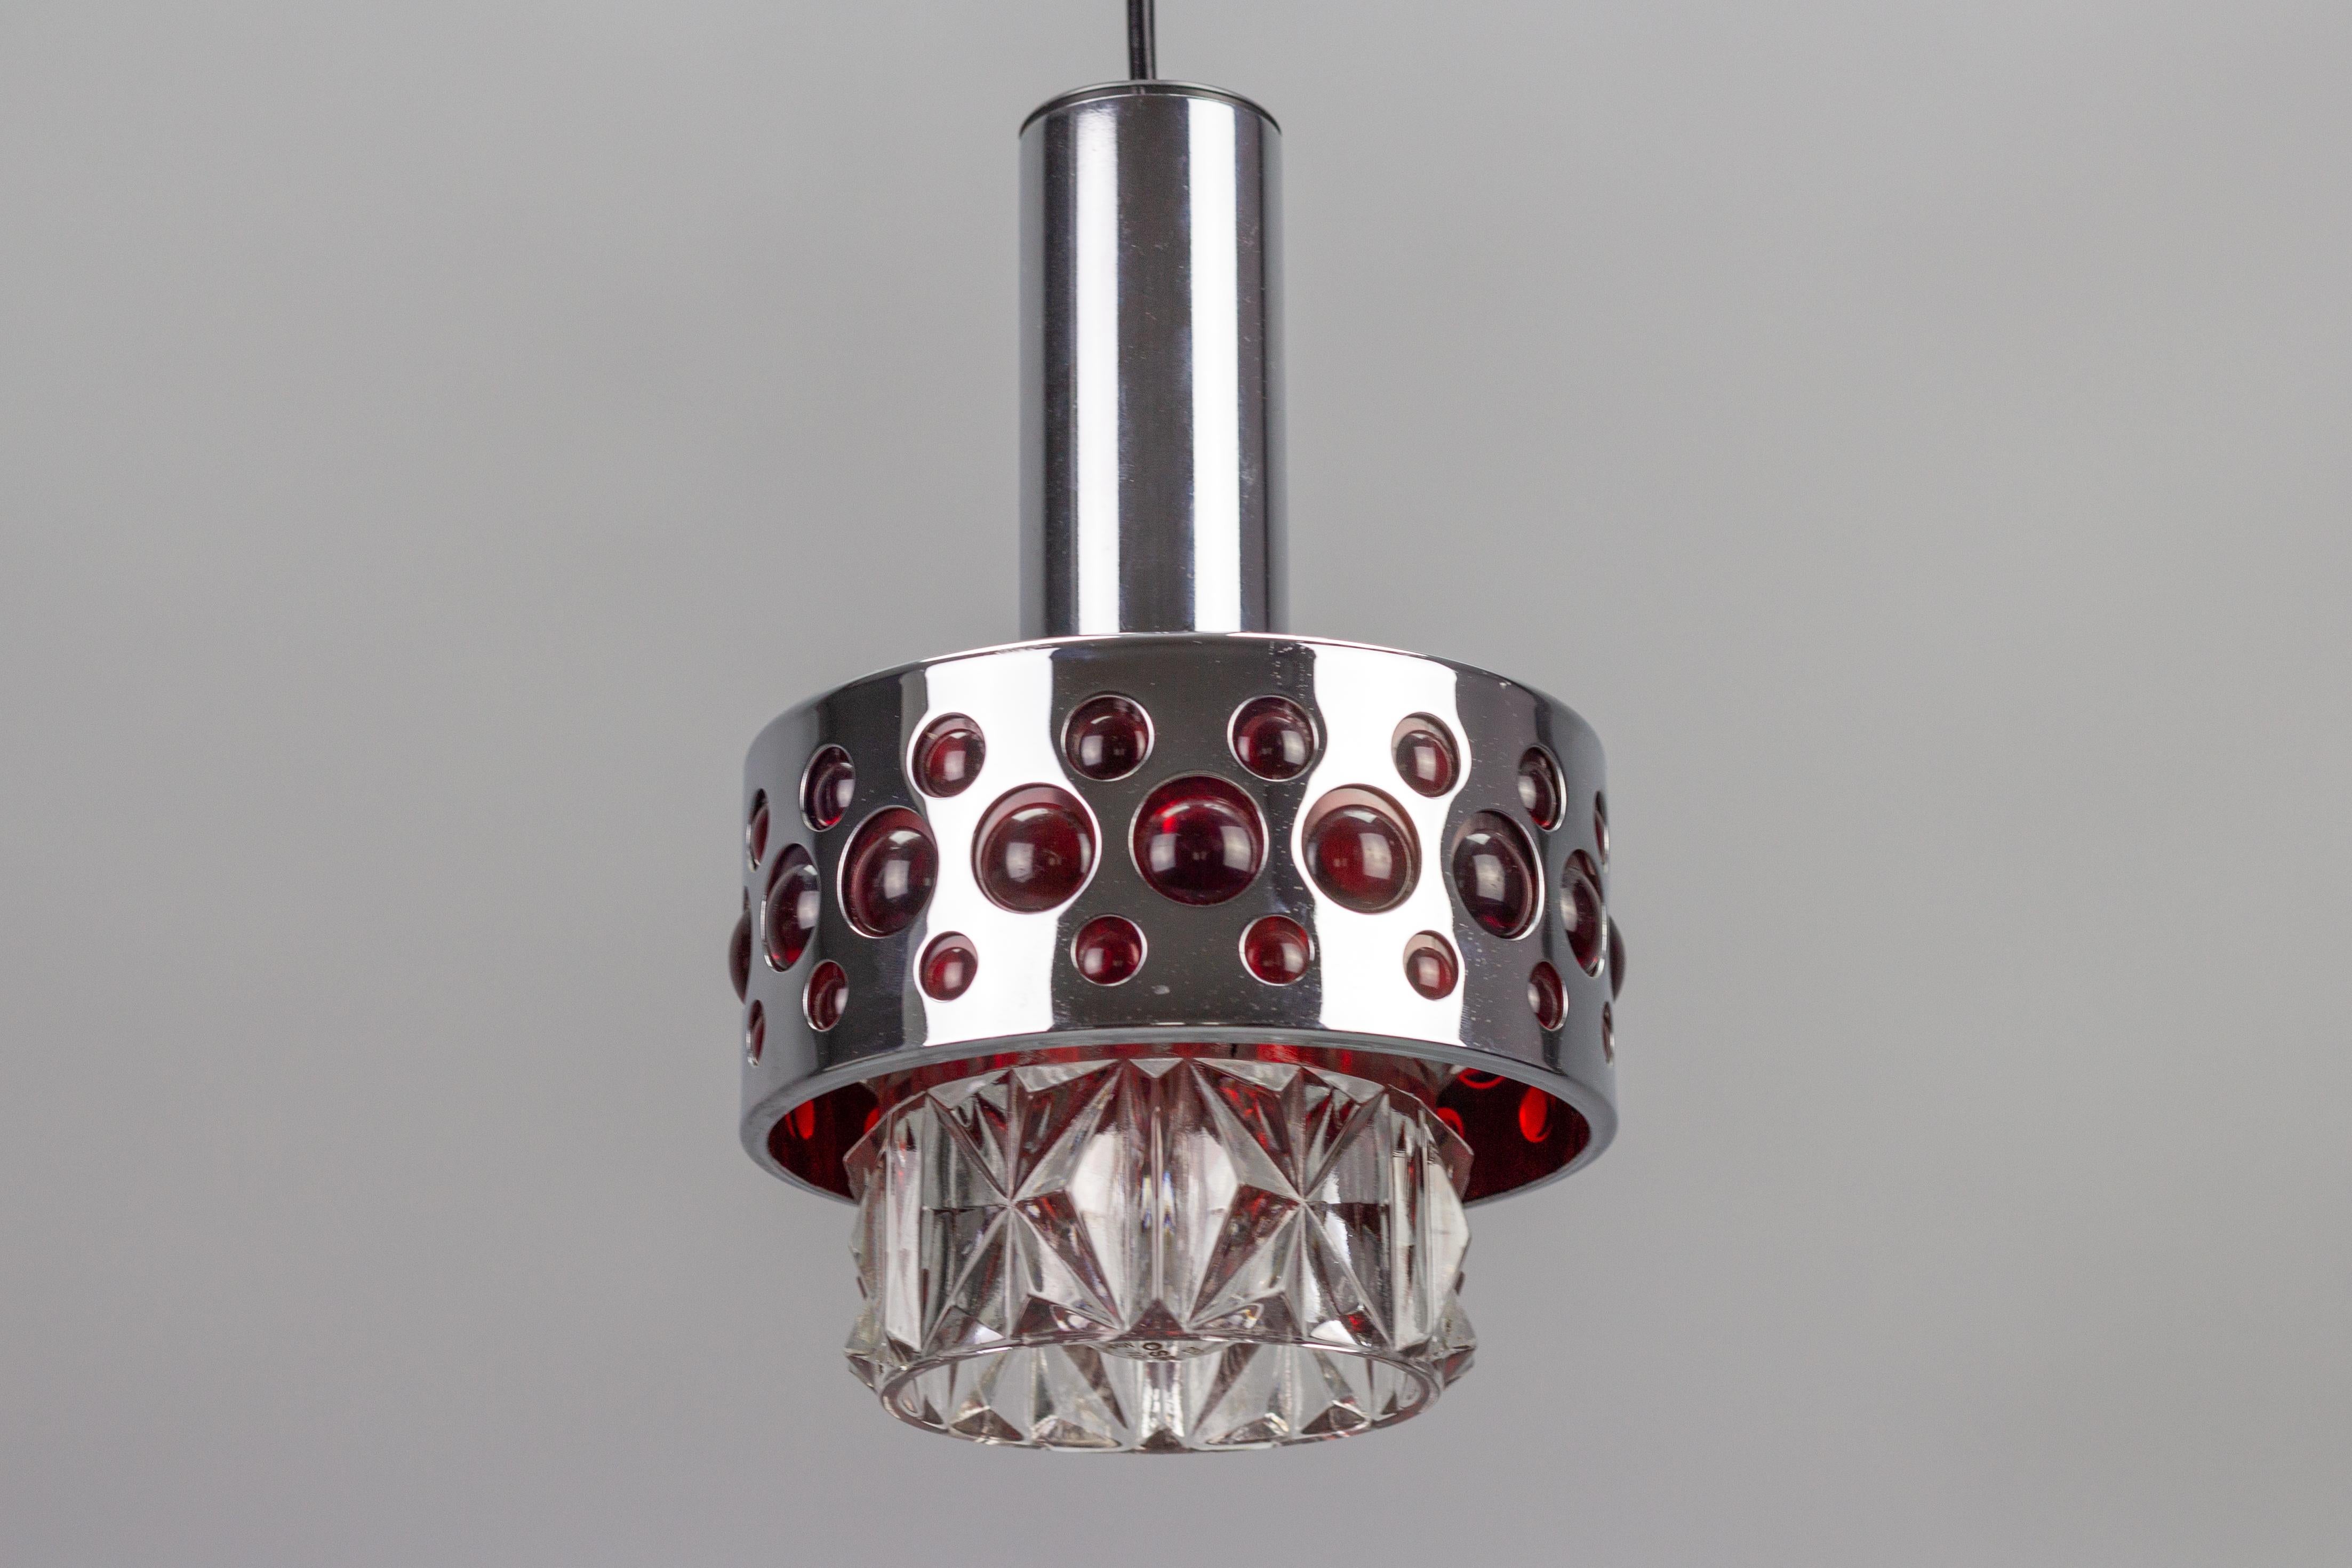 German Mid-Century Modern Chrome and Red Pendant Light by Richard Essig, 1970s For Sale 4